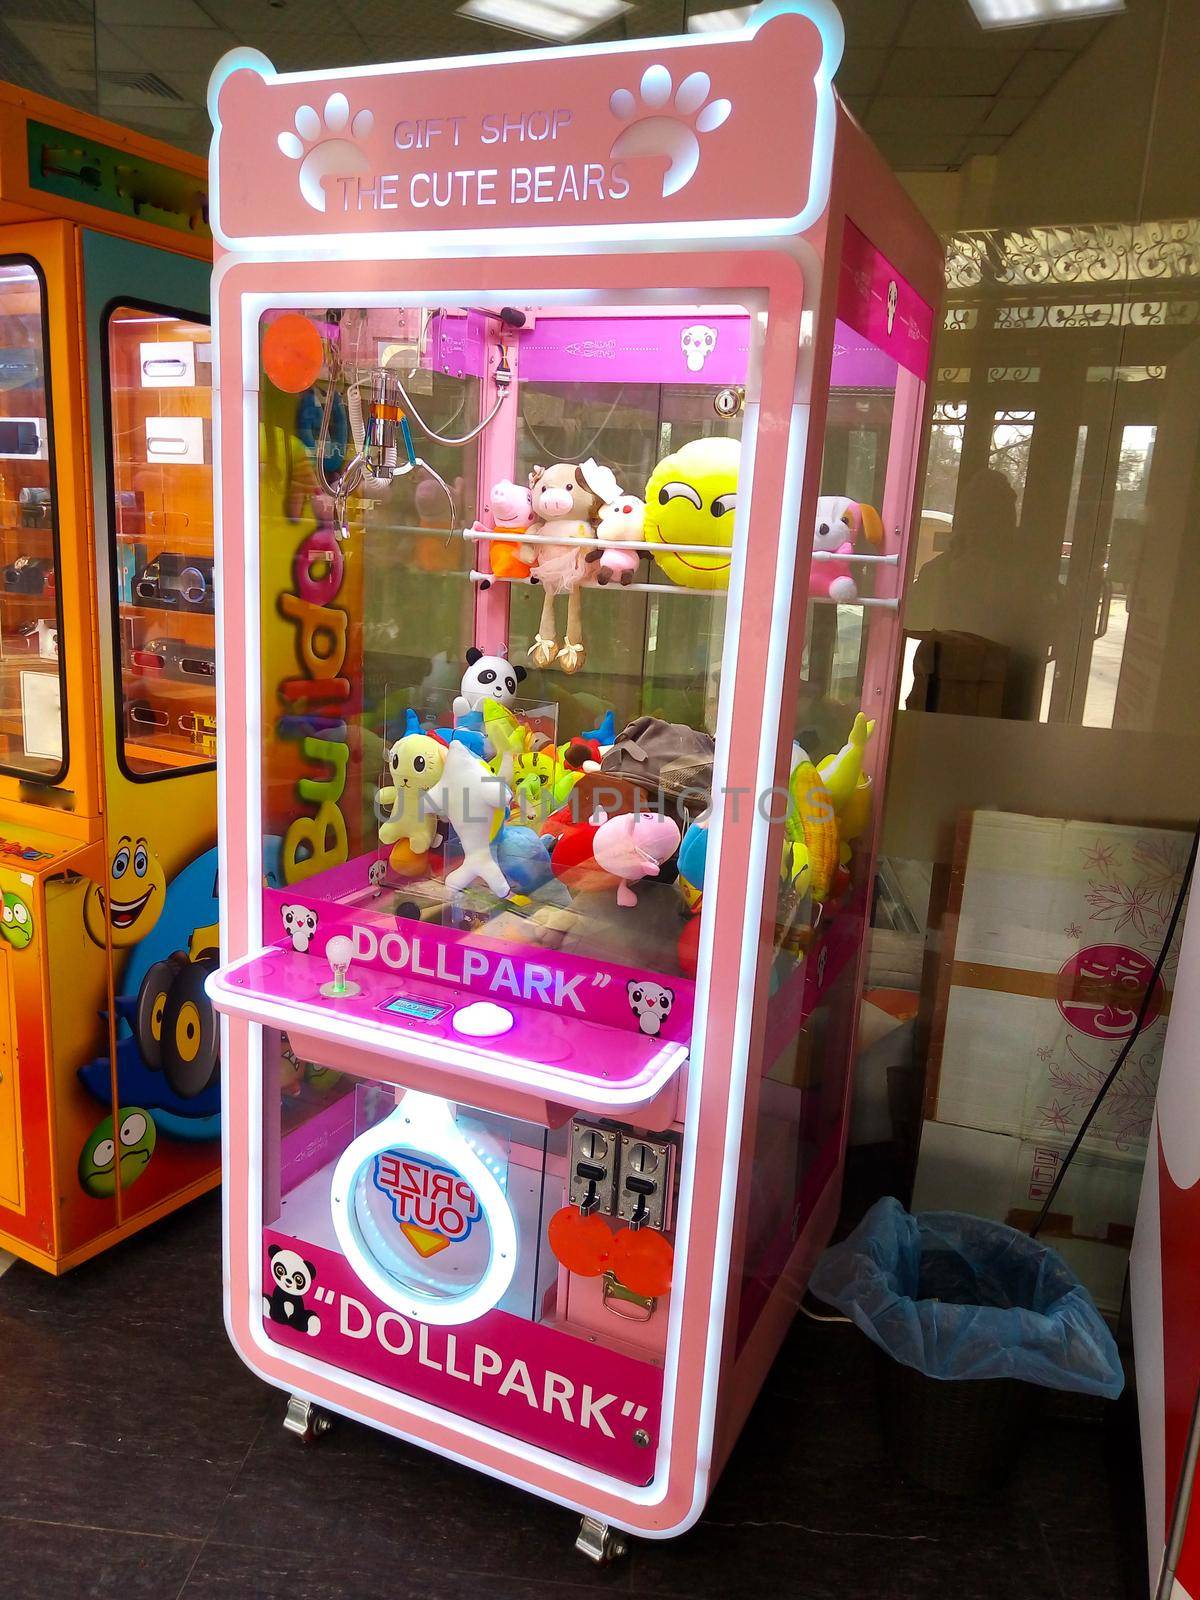 Russia Yaroslavl 21.02.2021 Pink slot machine with toys prizes in the children's center by lapushka62